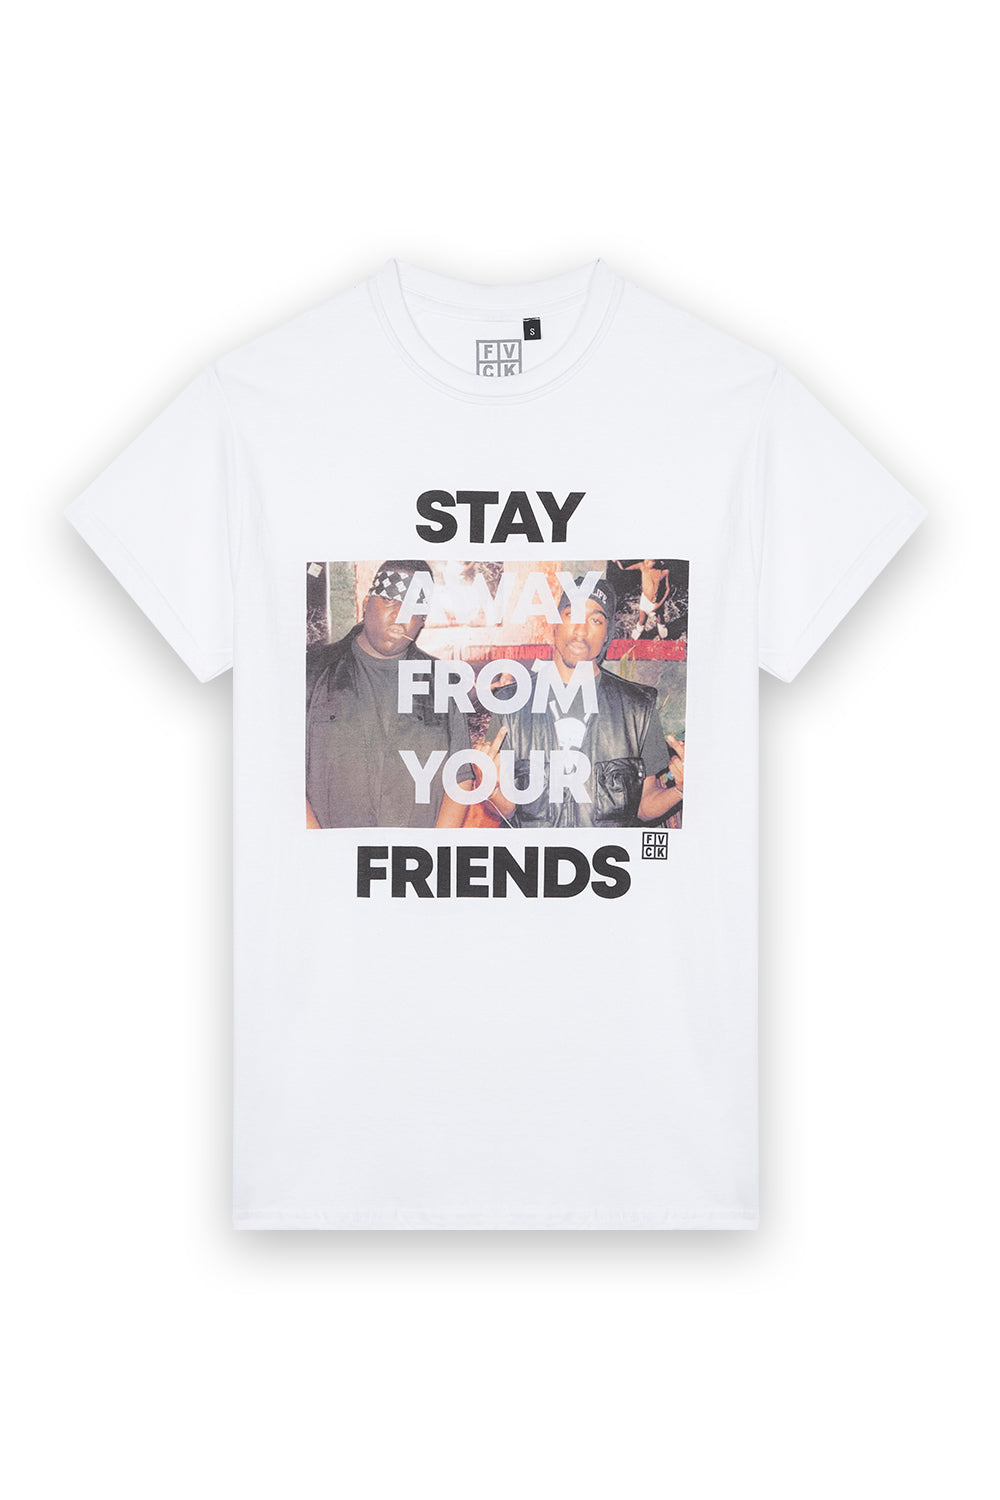 tshirt Tupac - notorious big - stay away from your friends - hip hop - streetwear - forverycoolkids - fvck